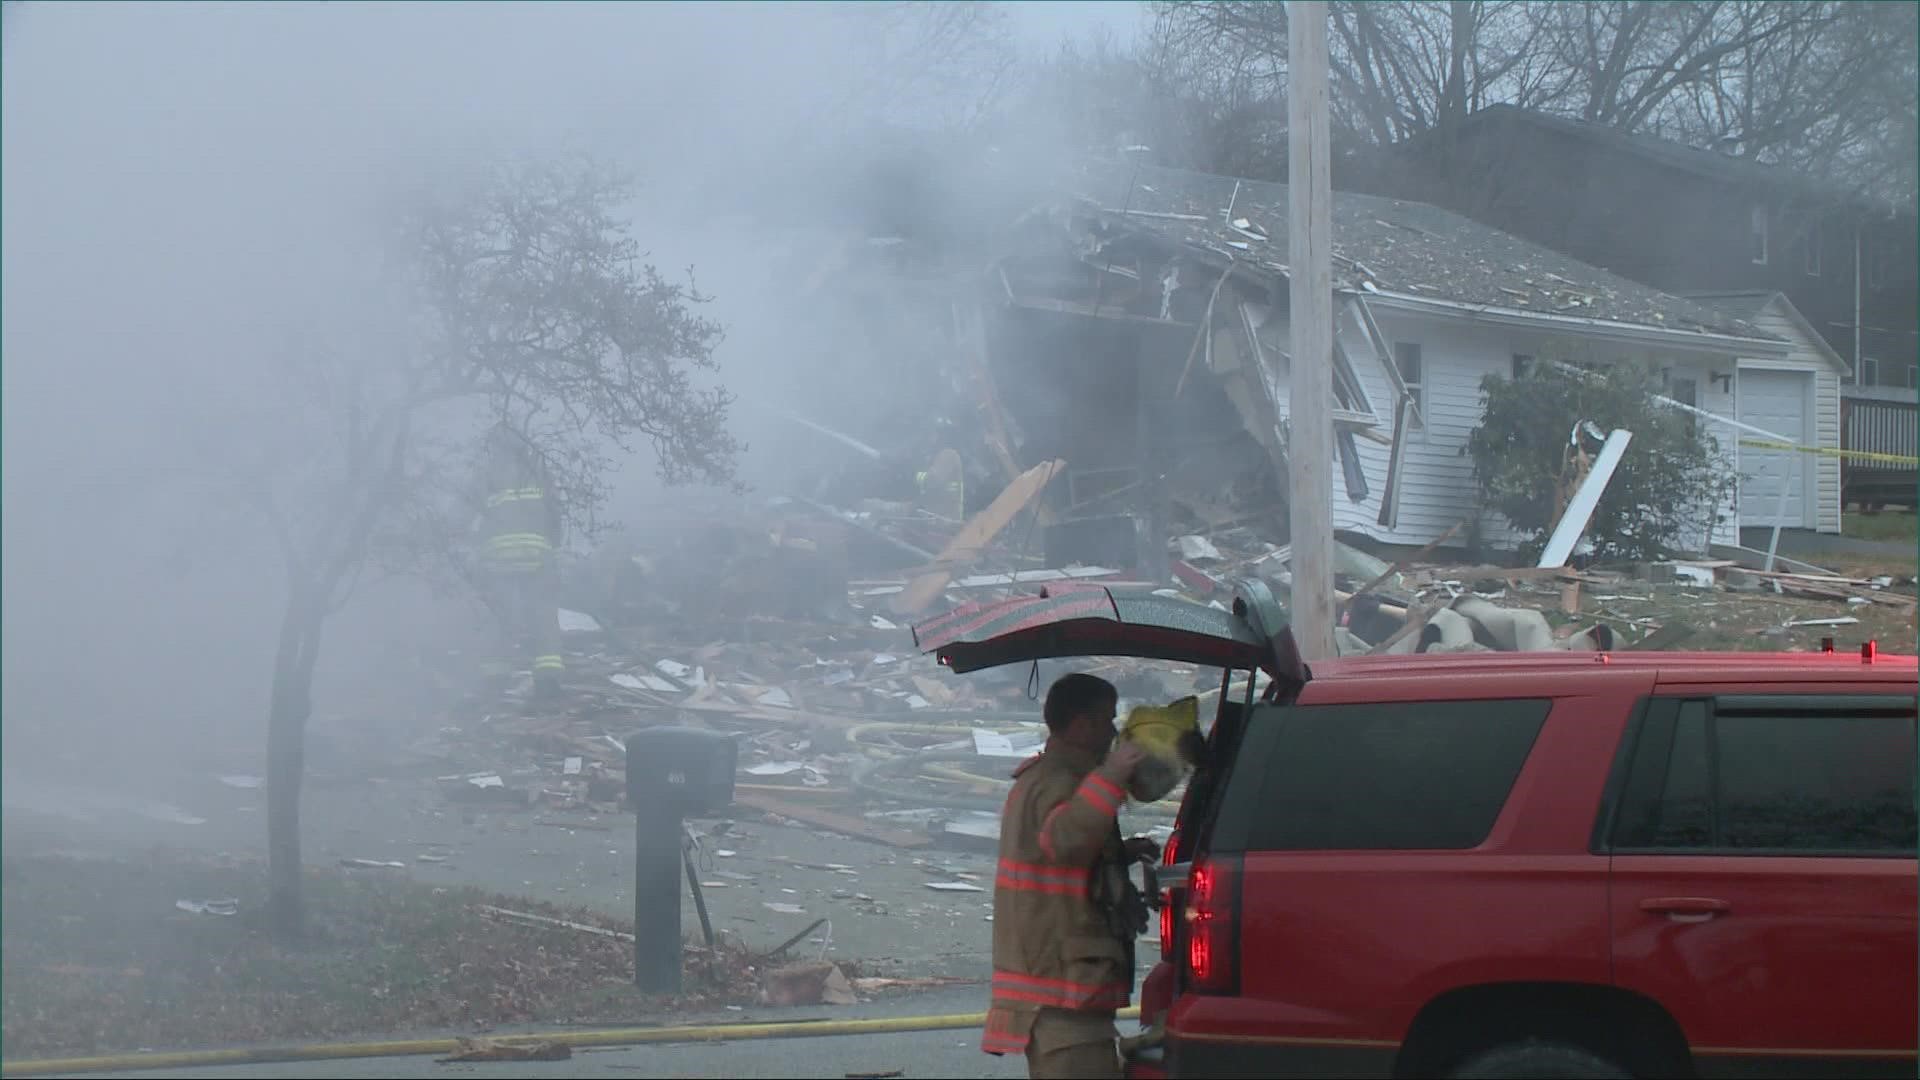 Witnesses say the home blew up in the area of East Long Lake Boulevard close to North Turkeyfoot Road.